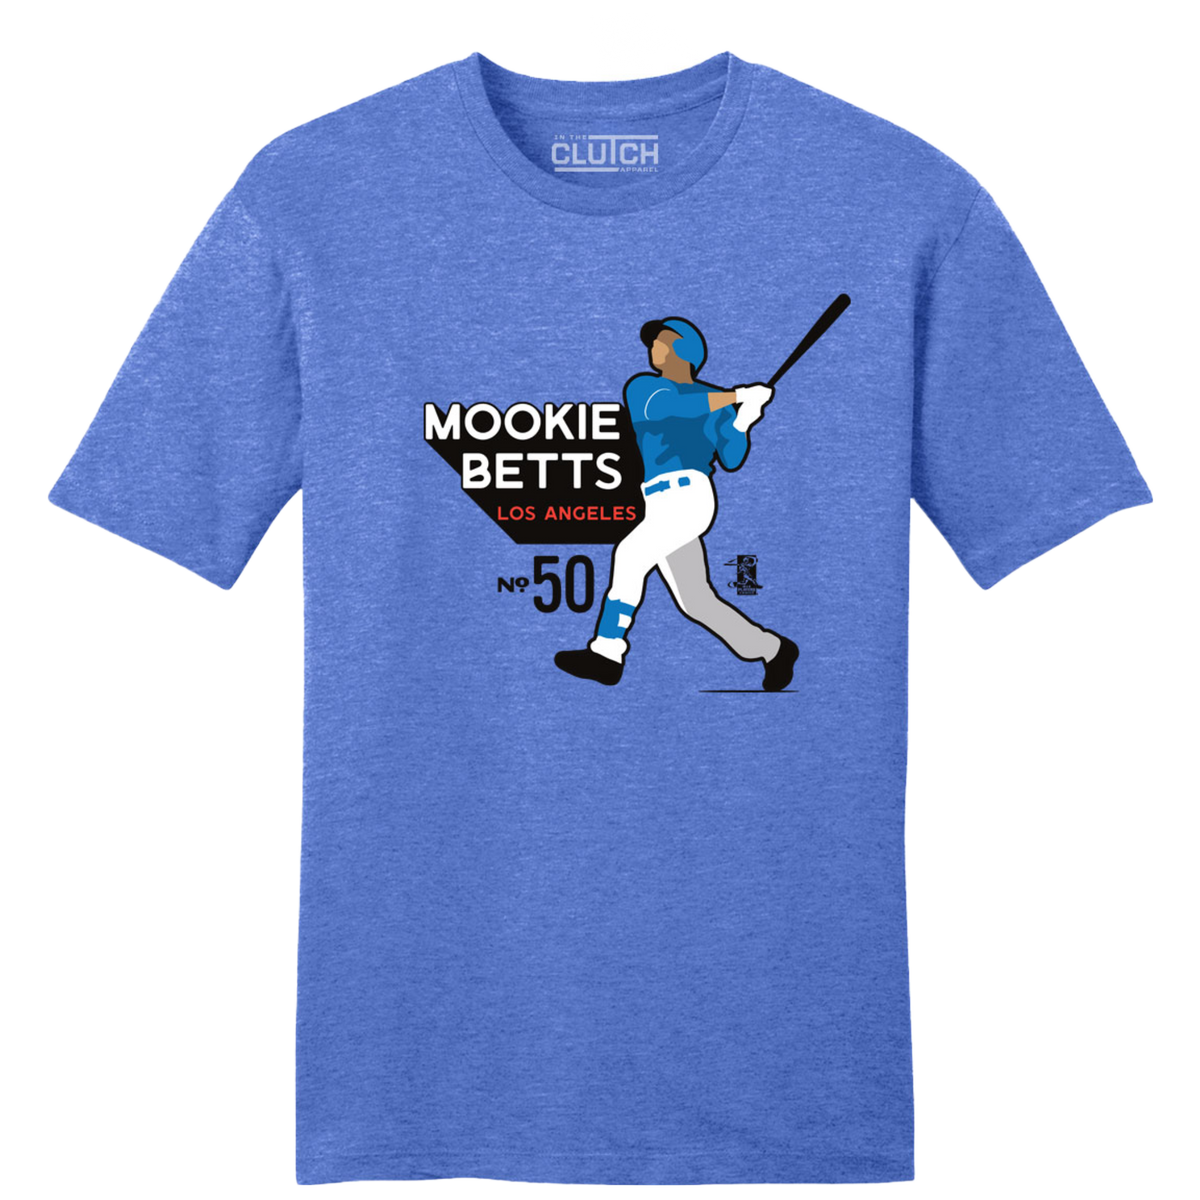 Official Mookie Betts MLBPA Gem Mint Collection Tee